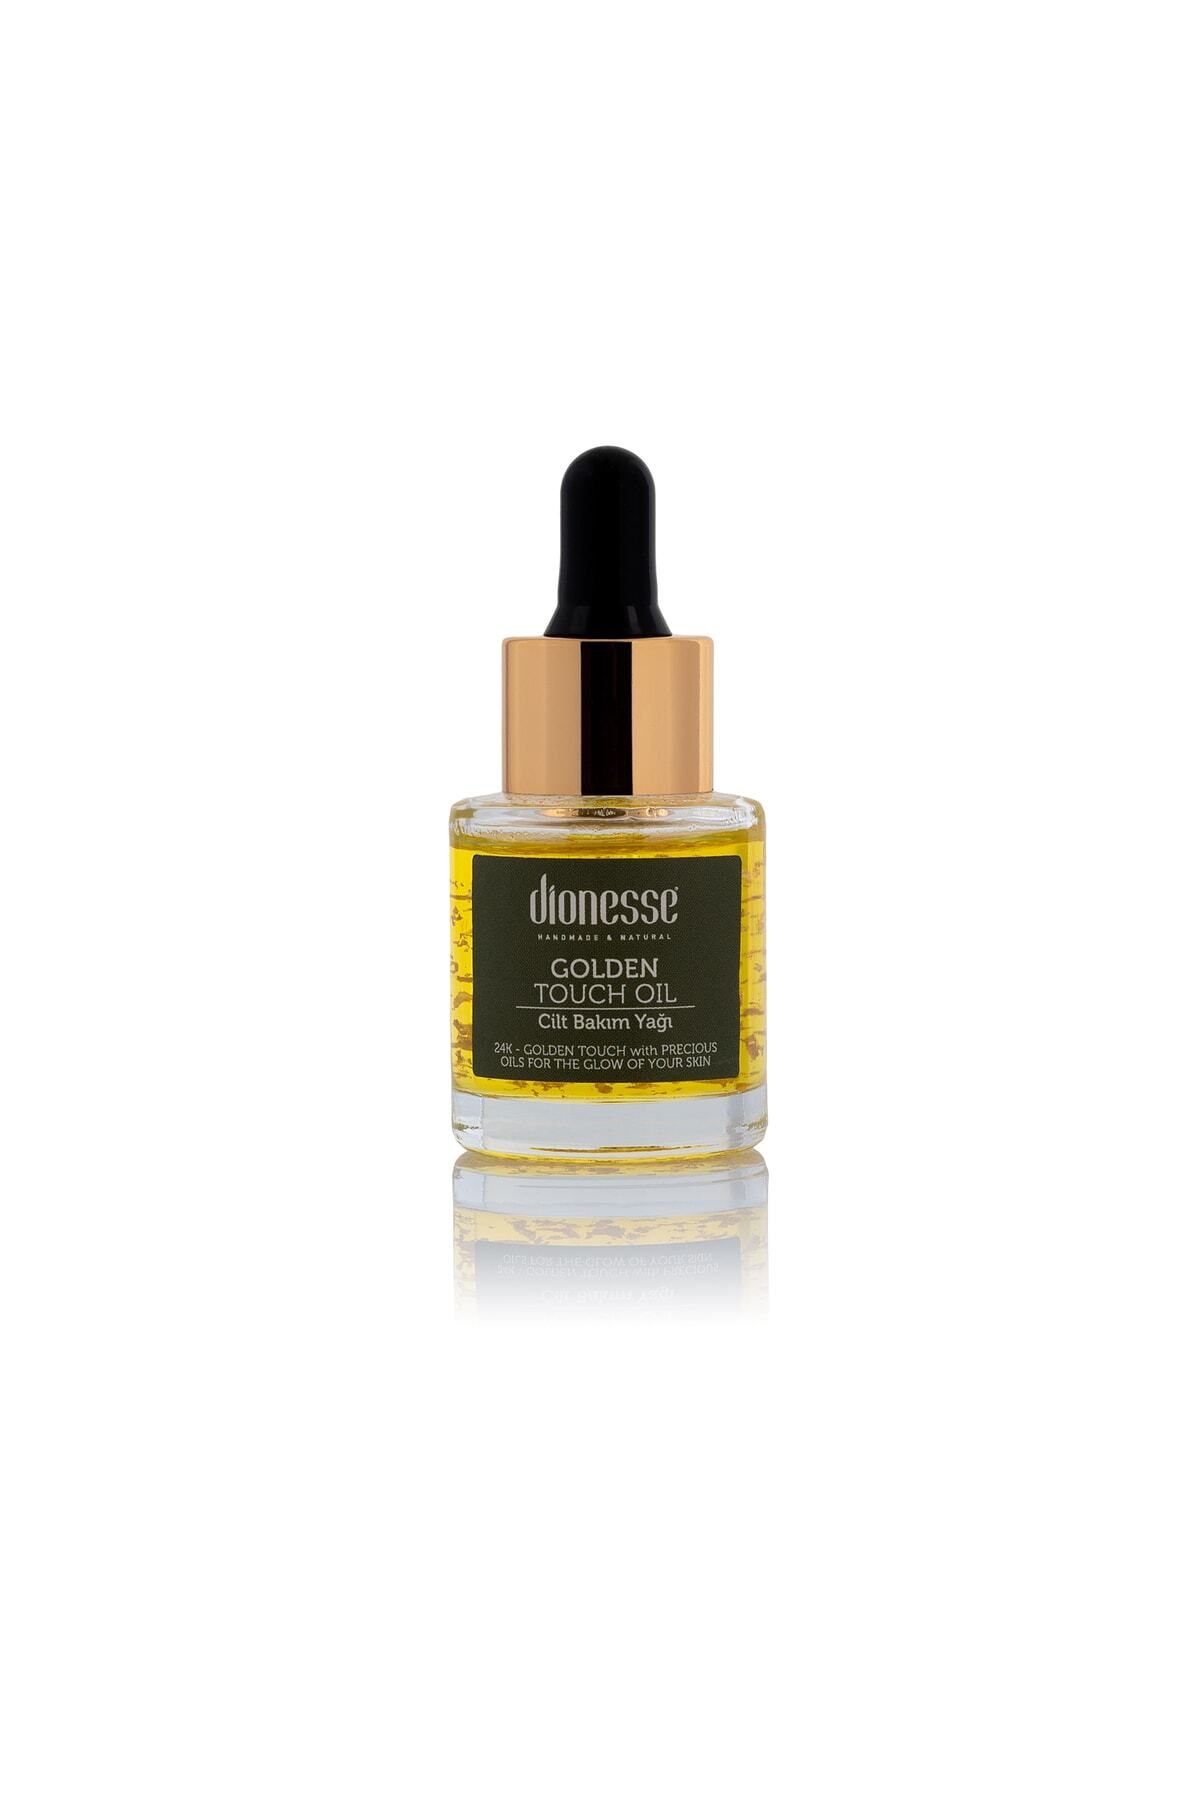 dionesse Golden Touch Oil